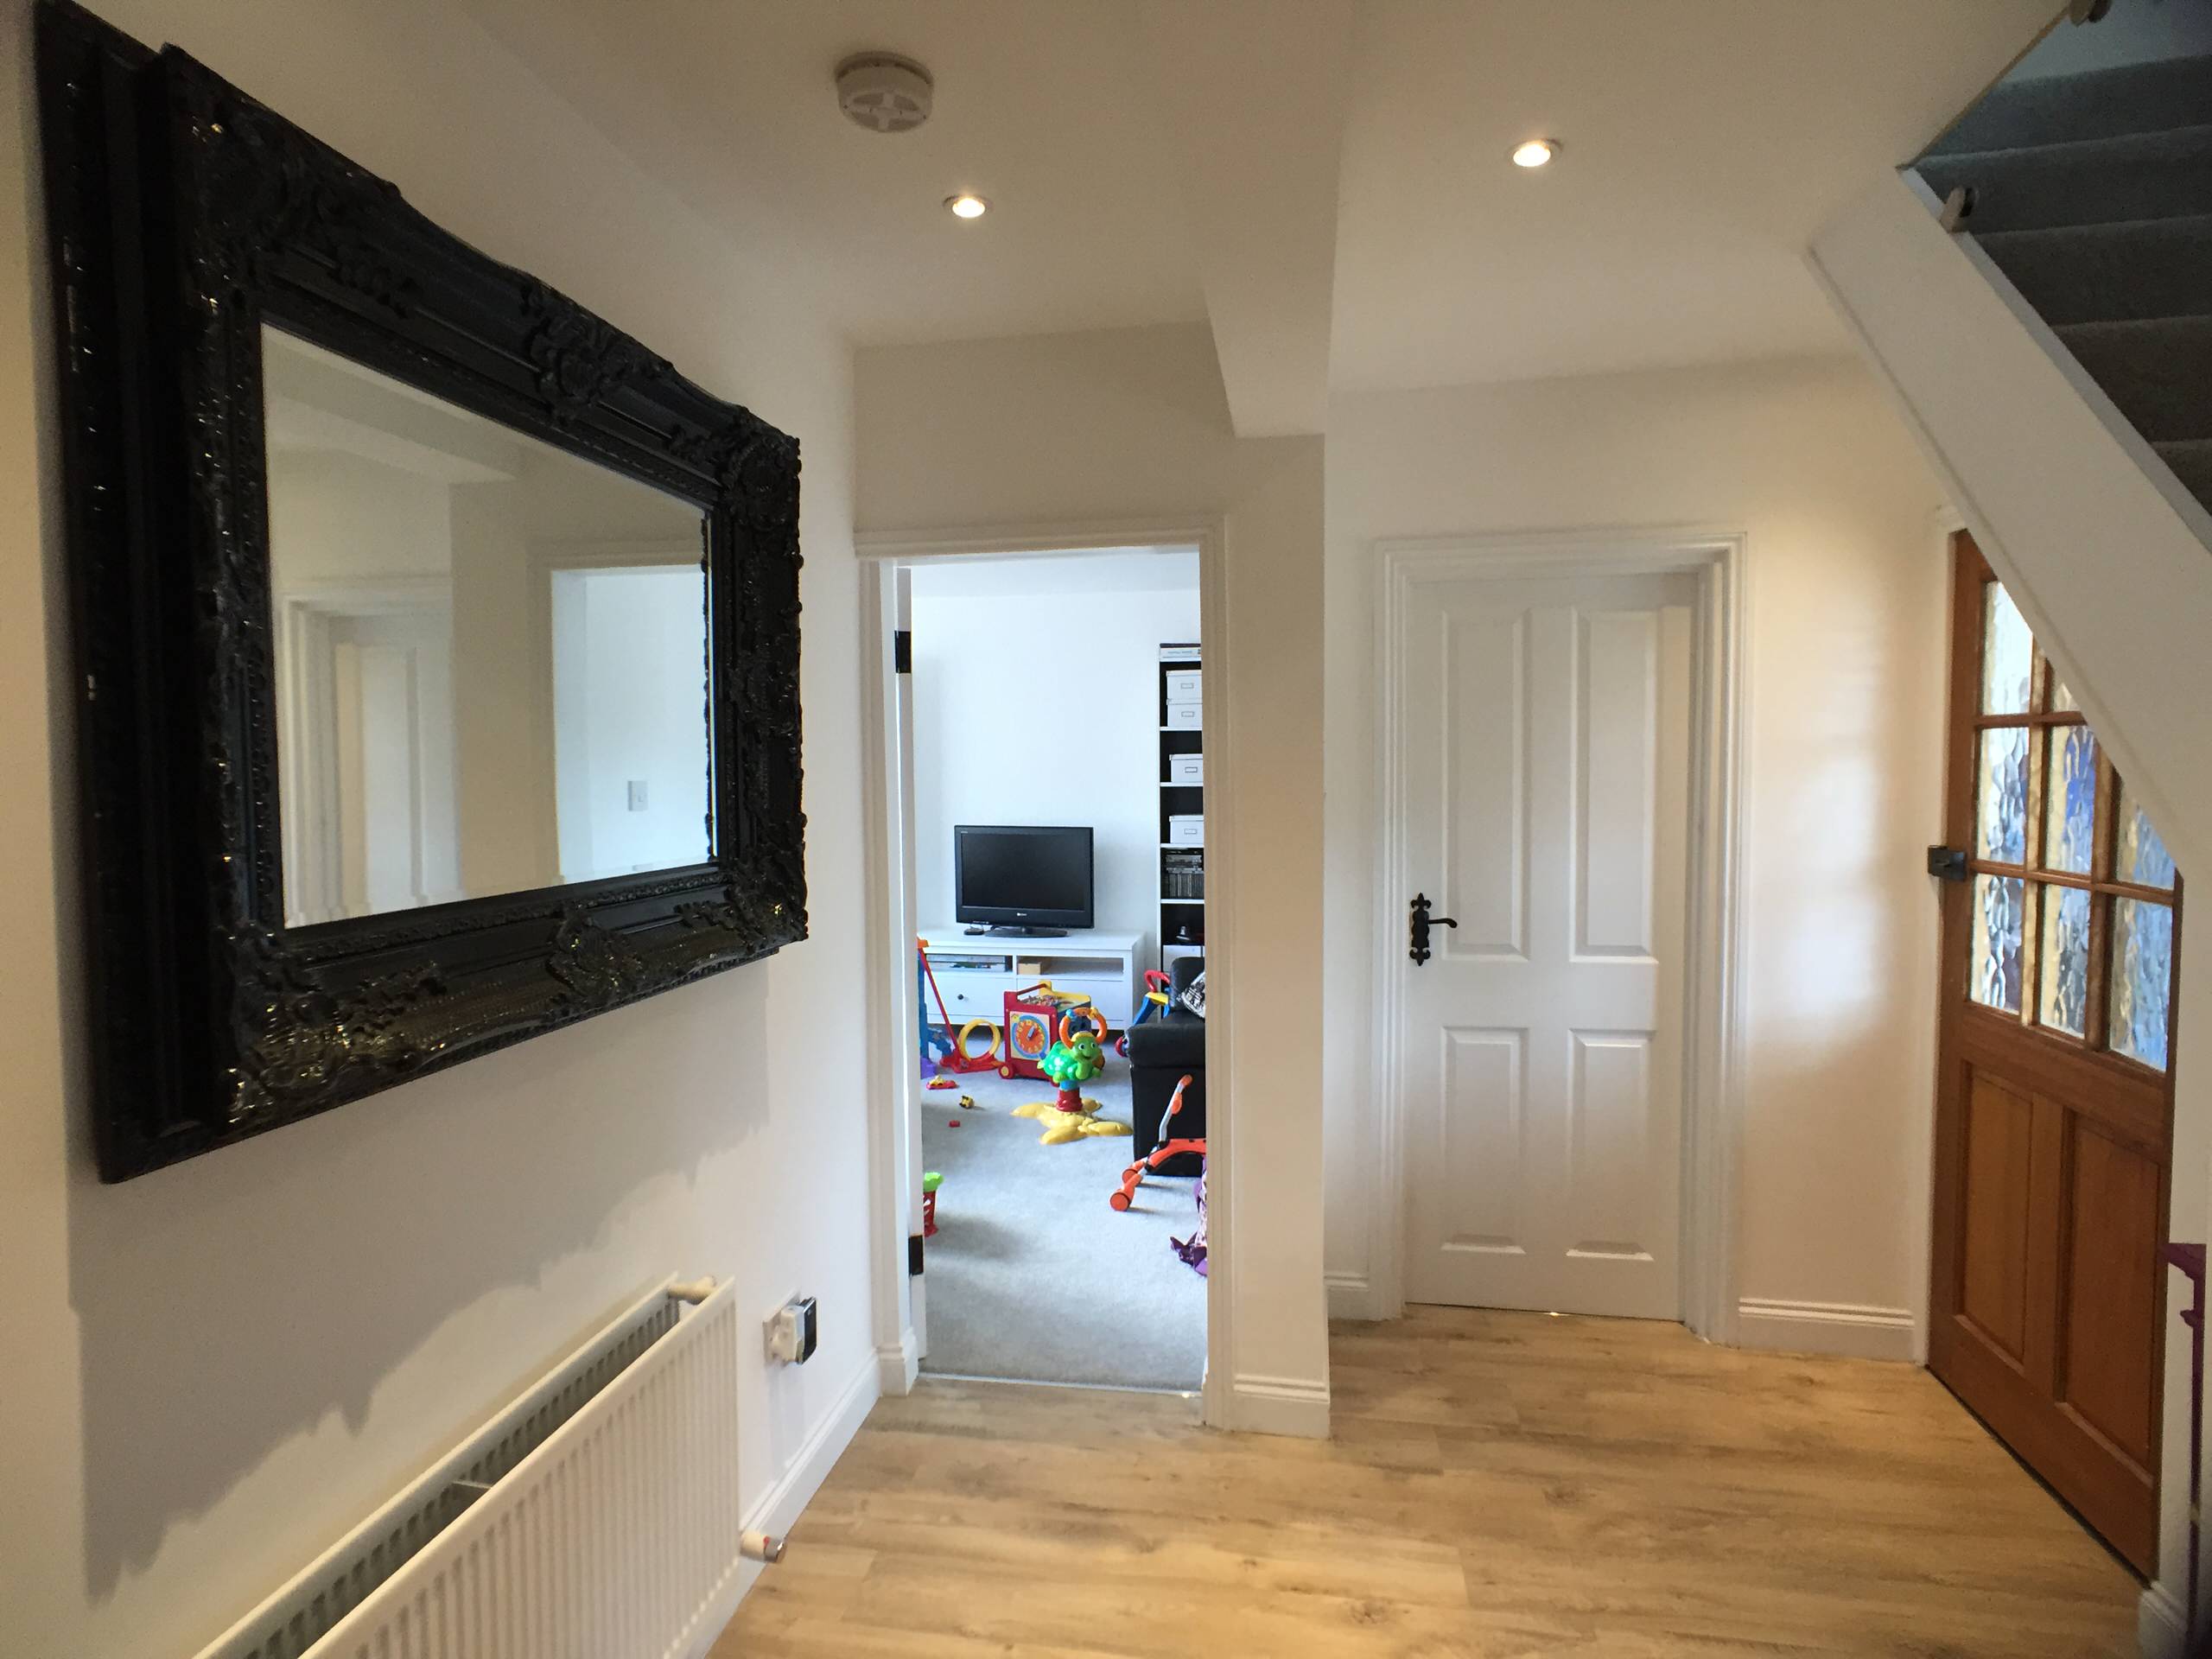 Double storey extension and full refurbishment to a 3 bed cottage in Chorleywood